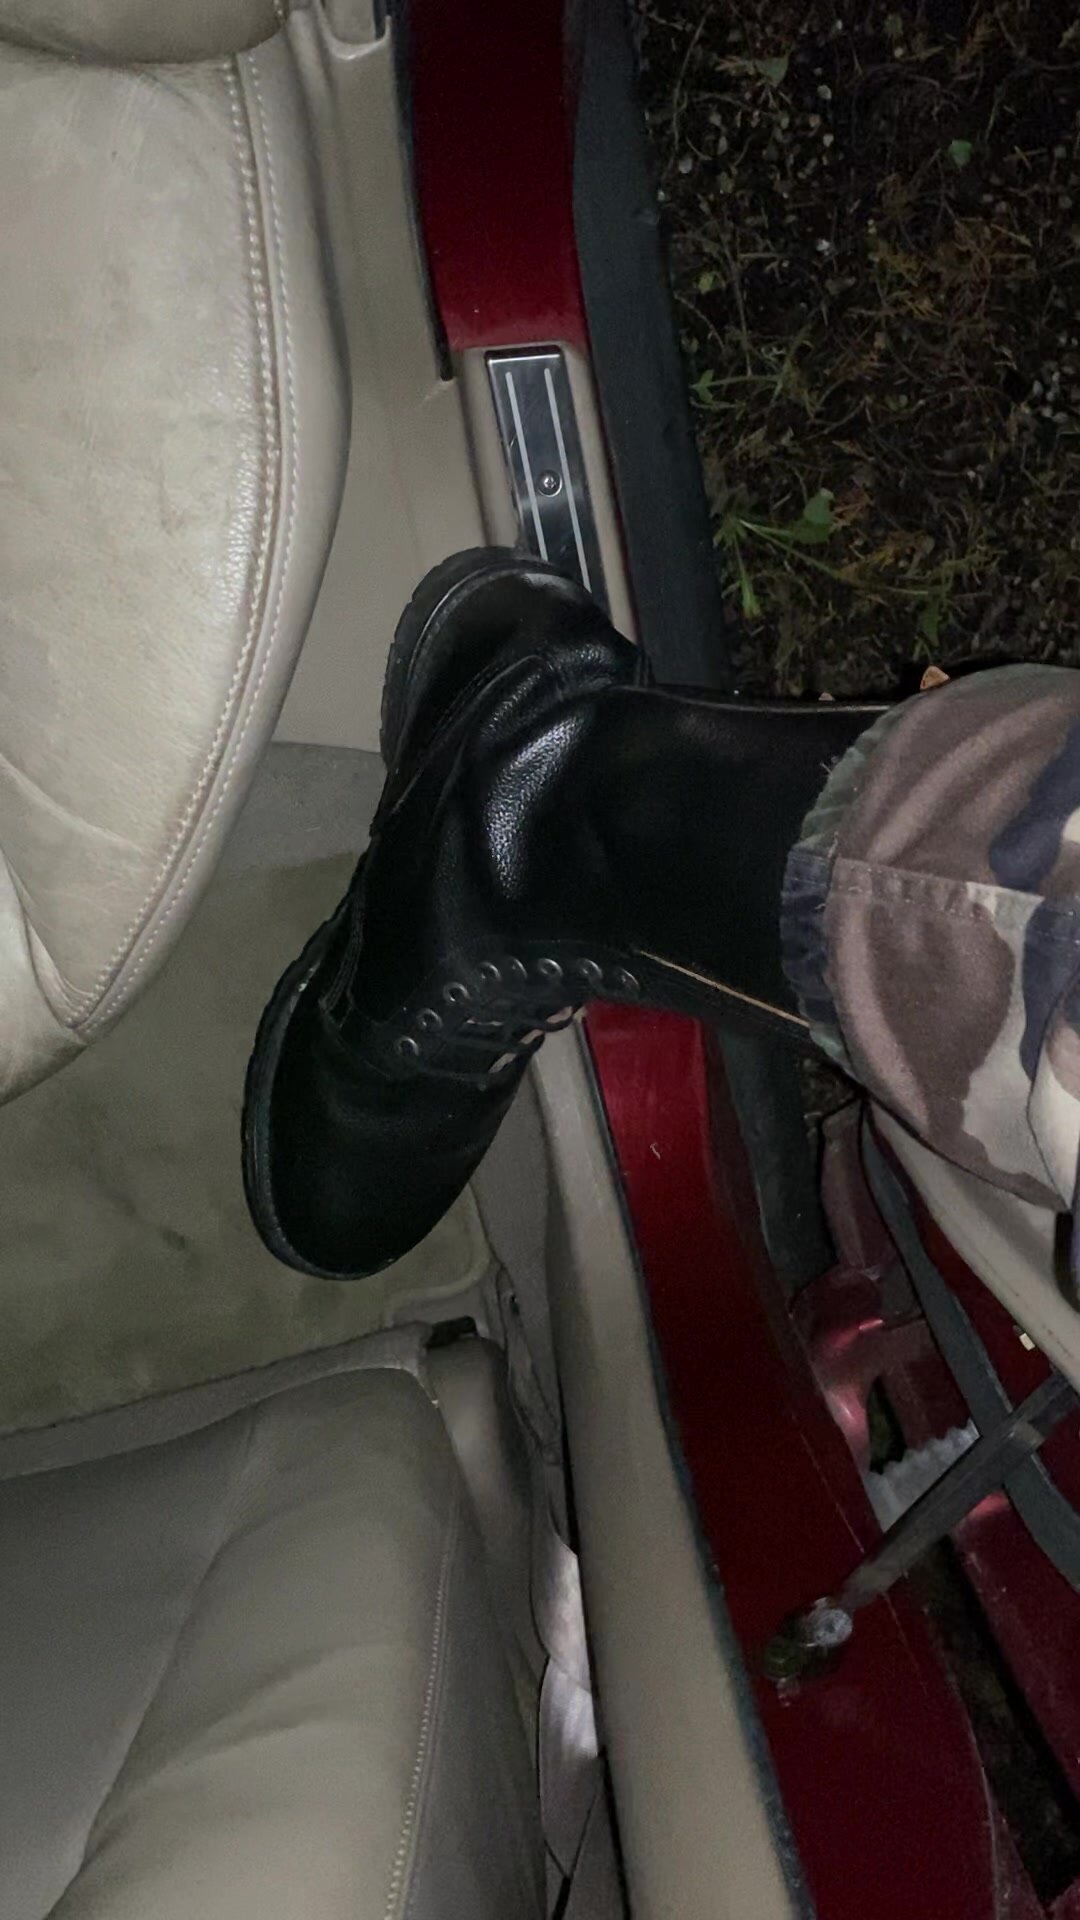 ARMY BOOTS FRENCH TRAMP A CAR